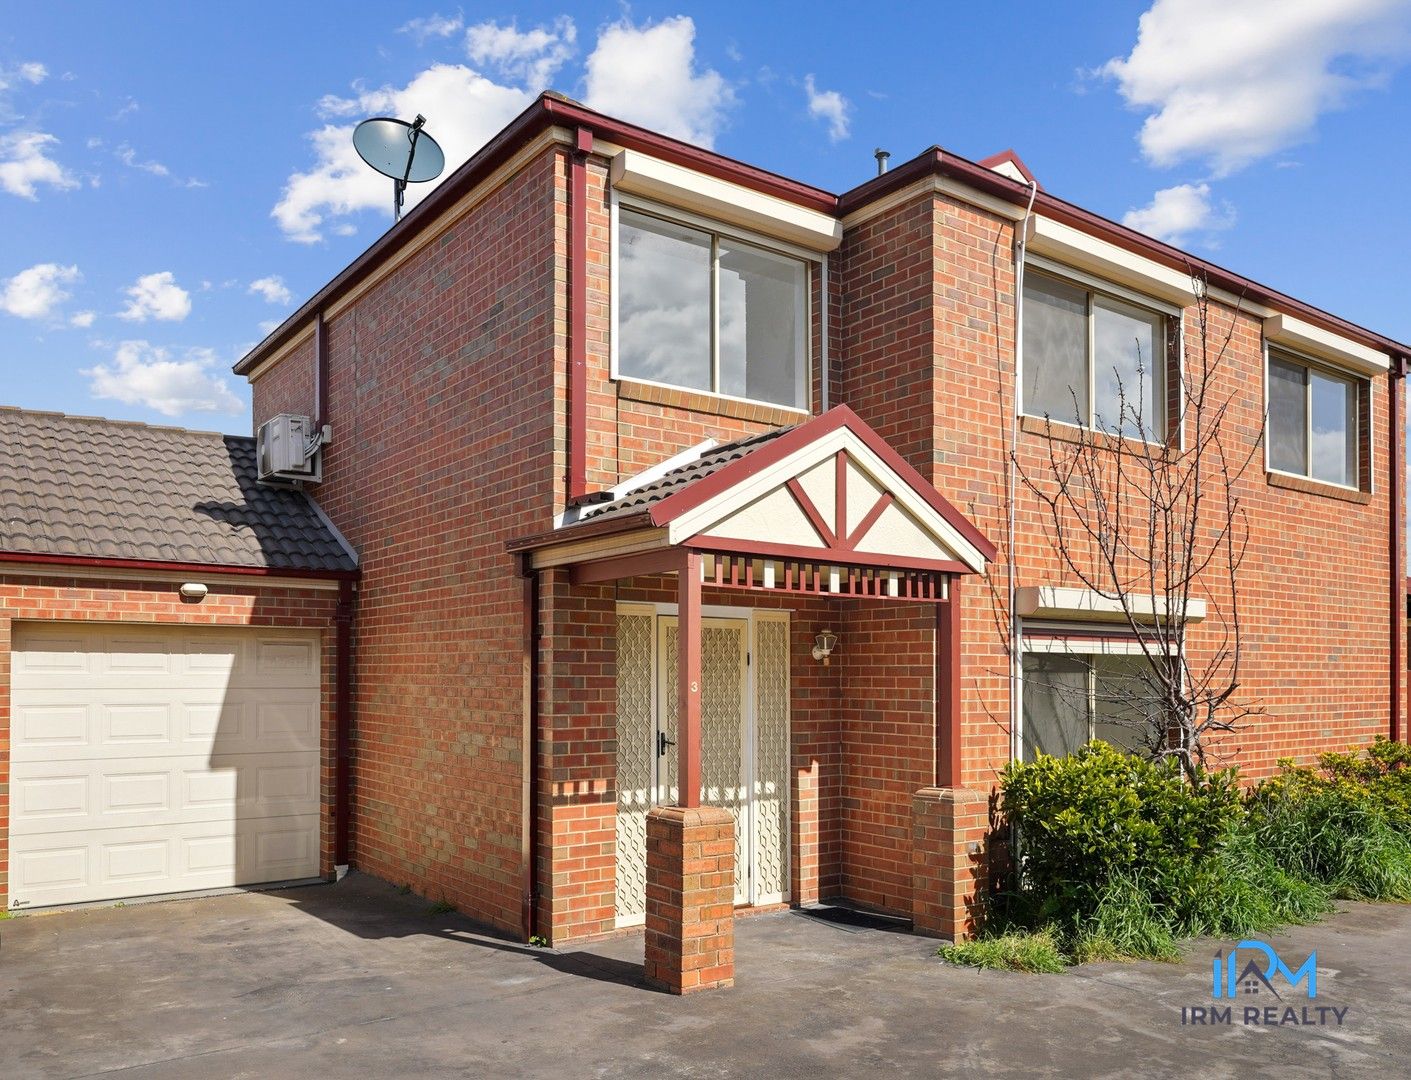 3 bedrooms Townhouse in 3/119 DUFFY STREET EPPING VIC, 3076